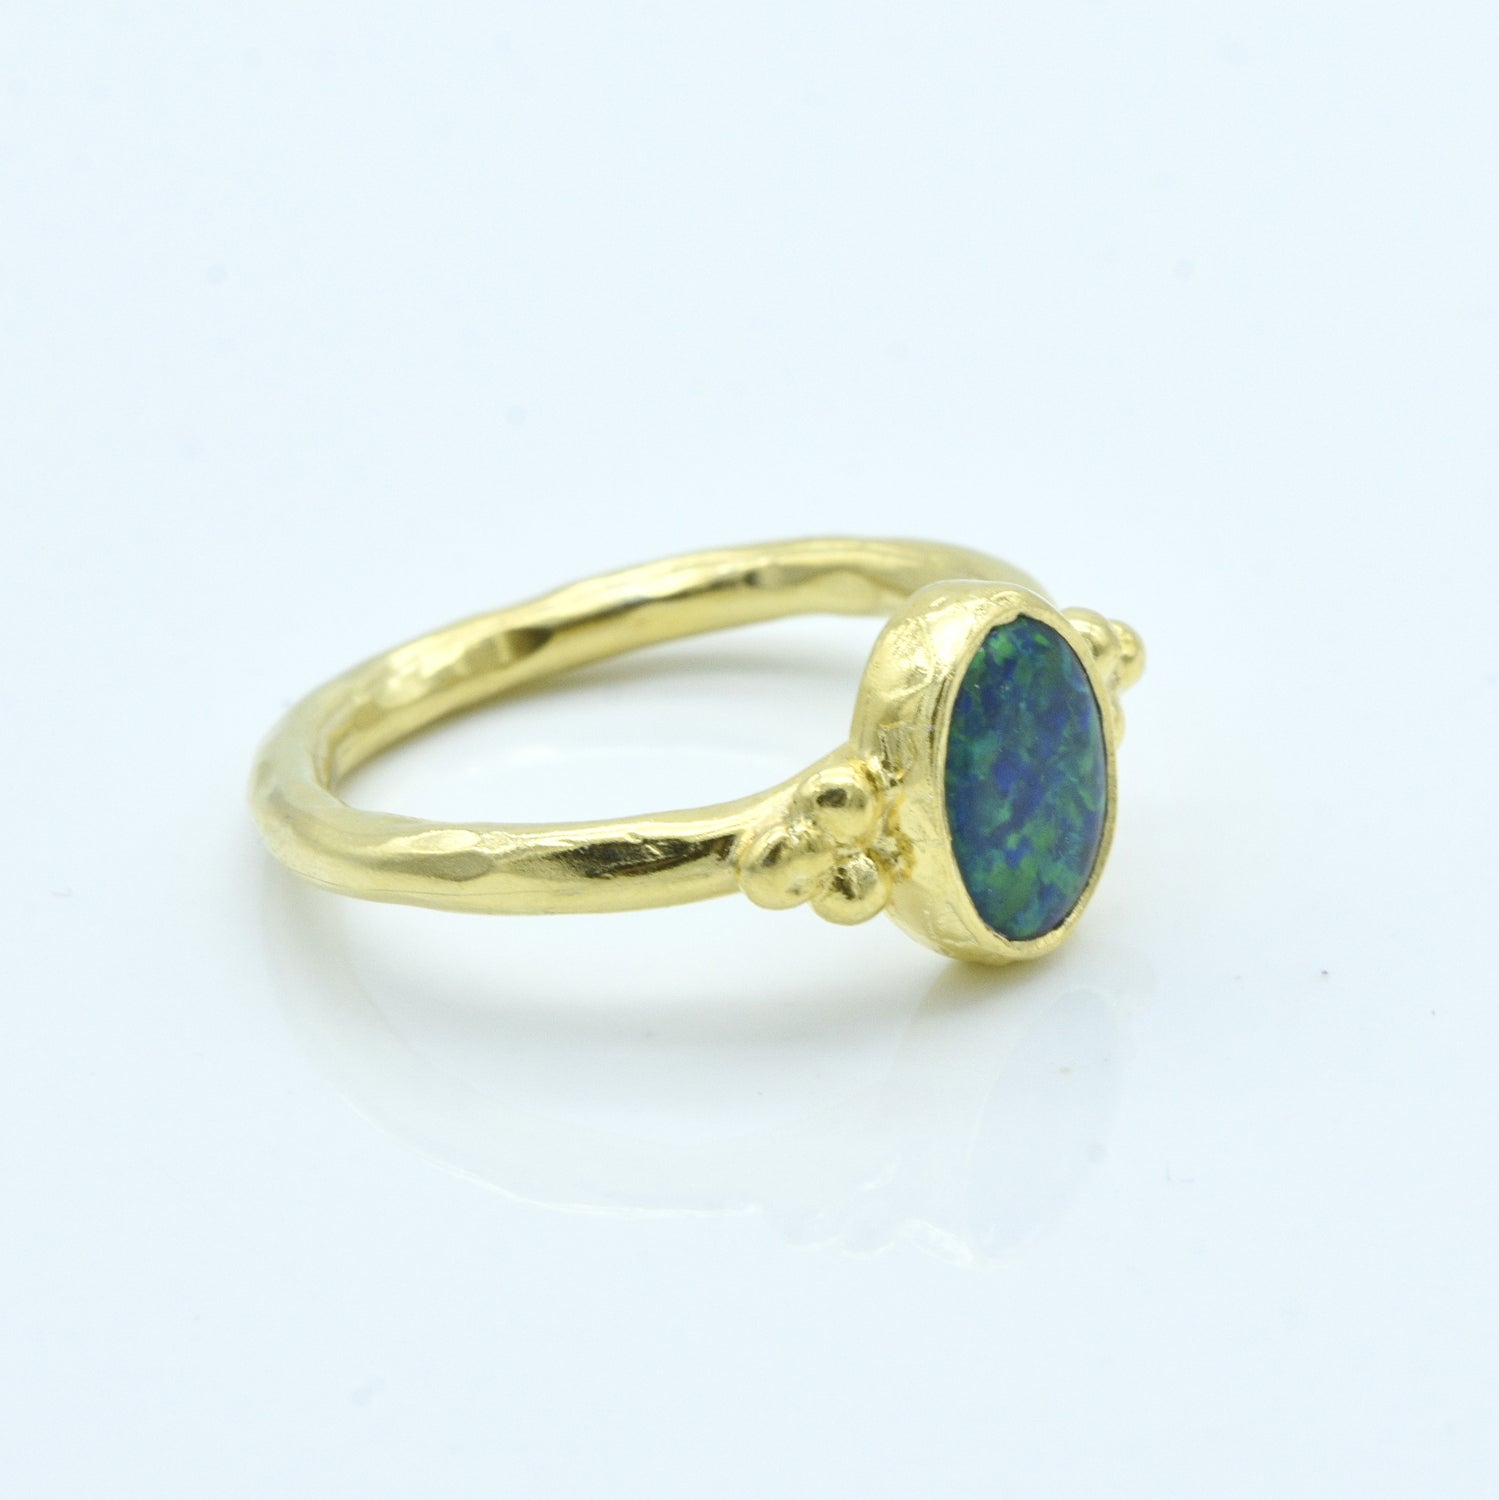 Aylas Opal ring - 21ct Gold plated 925 silver - Handmade in Ottoman Style by Artisan